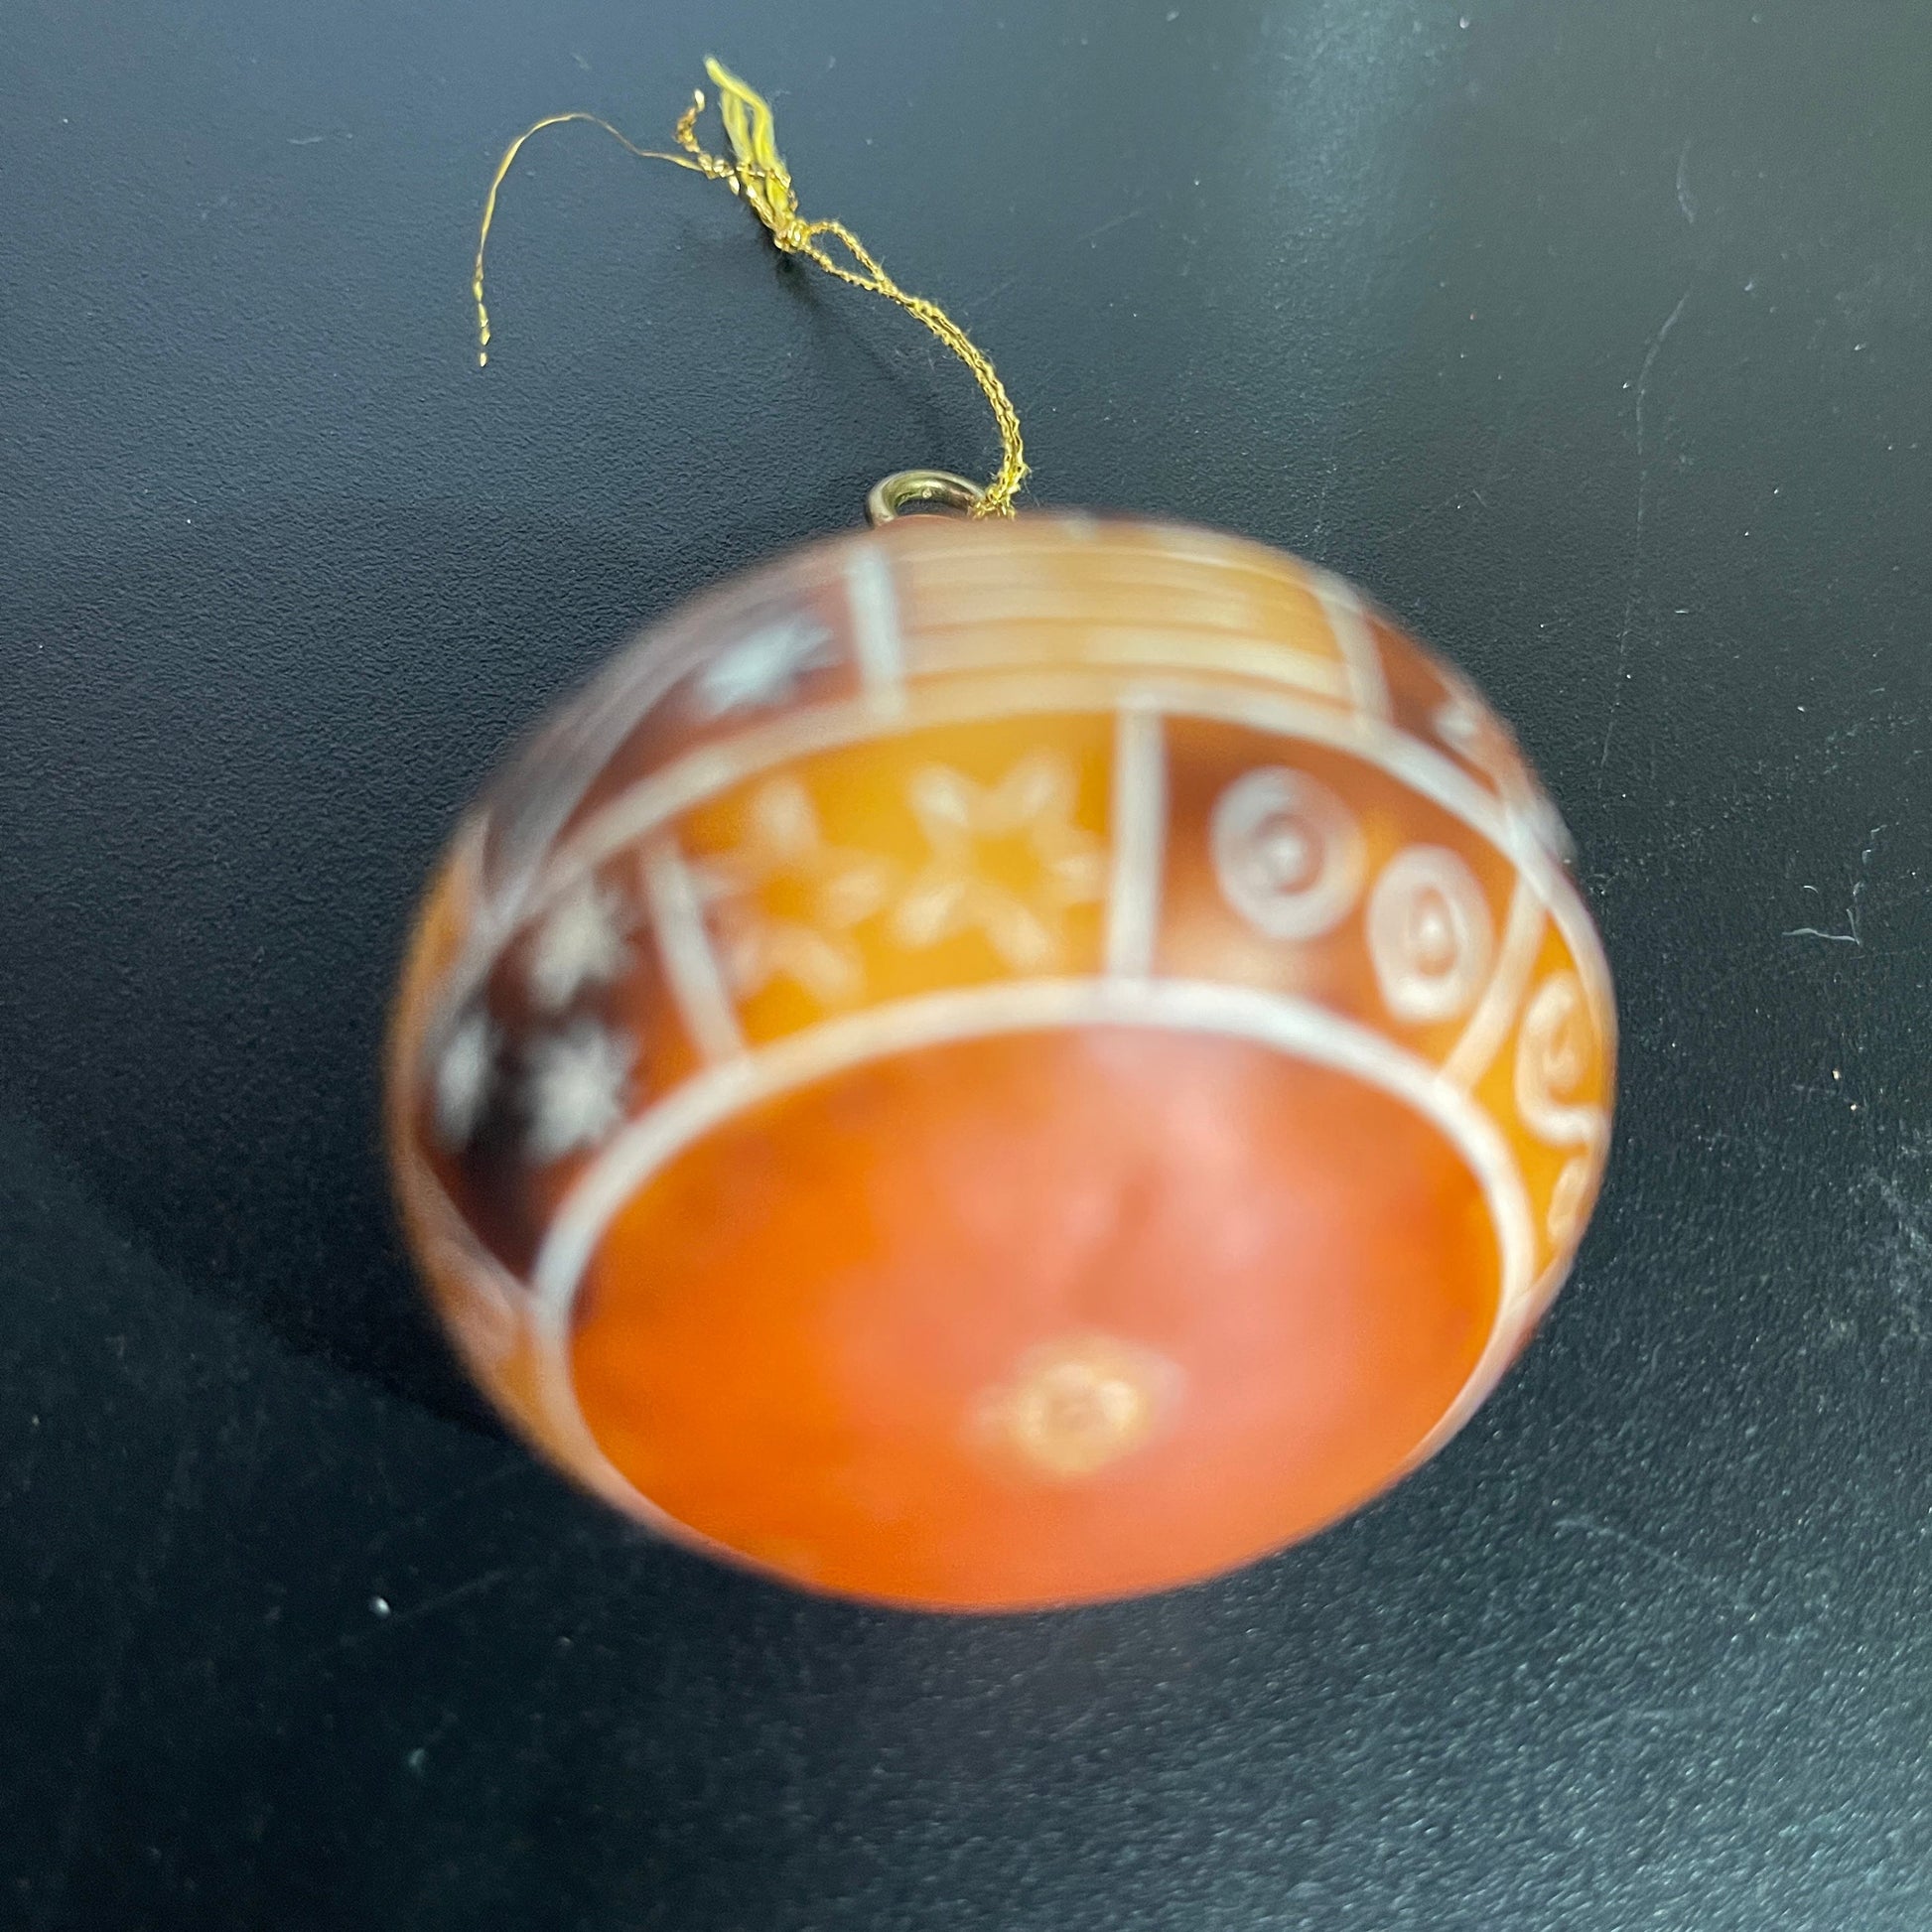 Indigenous Peoples style carved gourd Christmas ornament